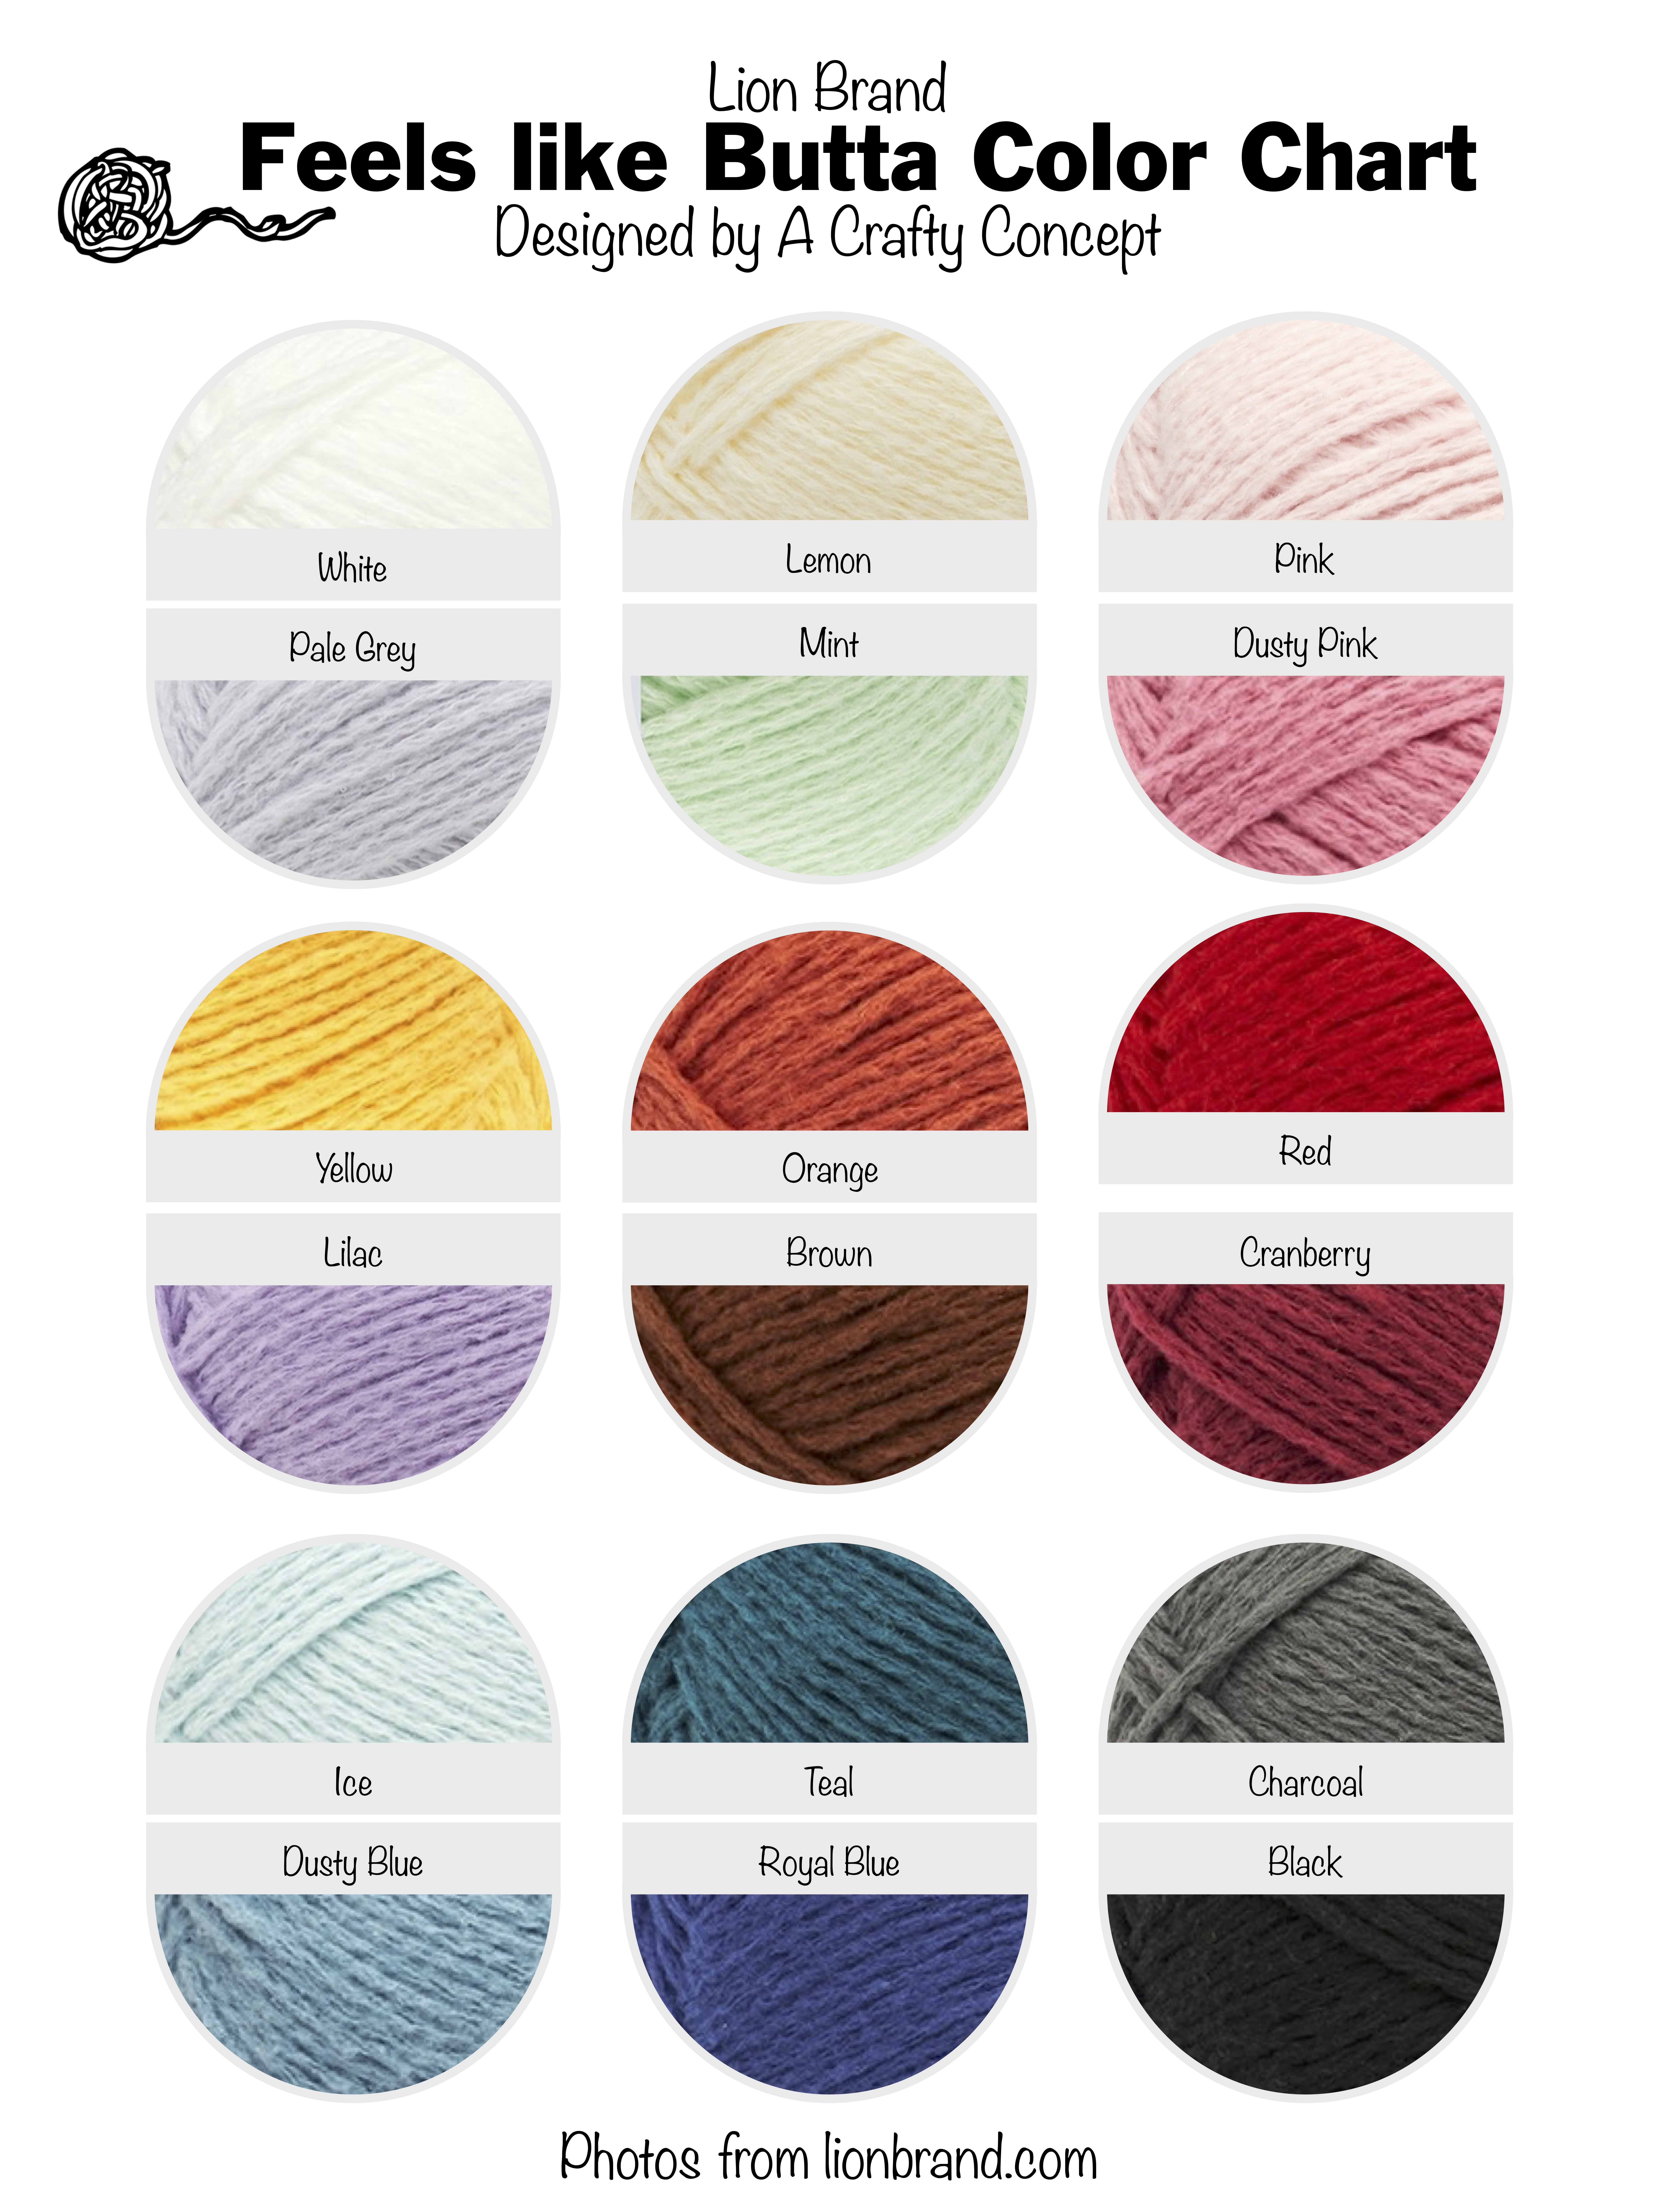 Lion Brand Yarn- Free Color Charts - A Crafty Concept